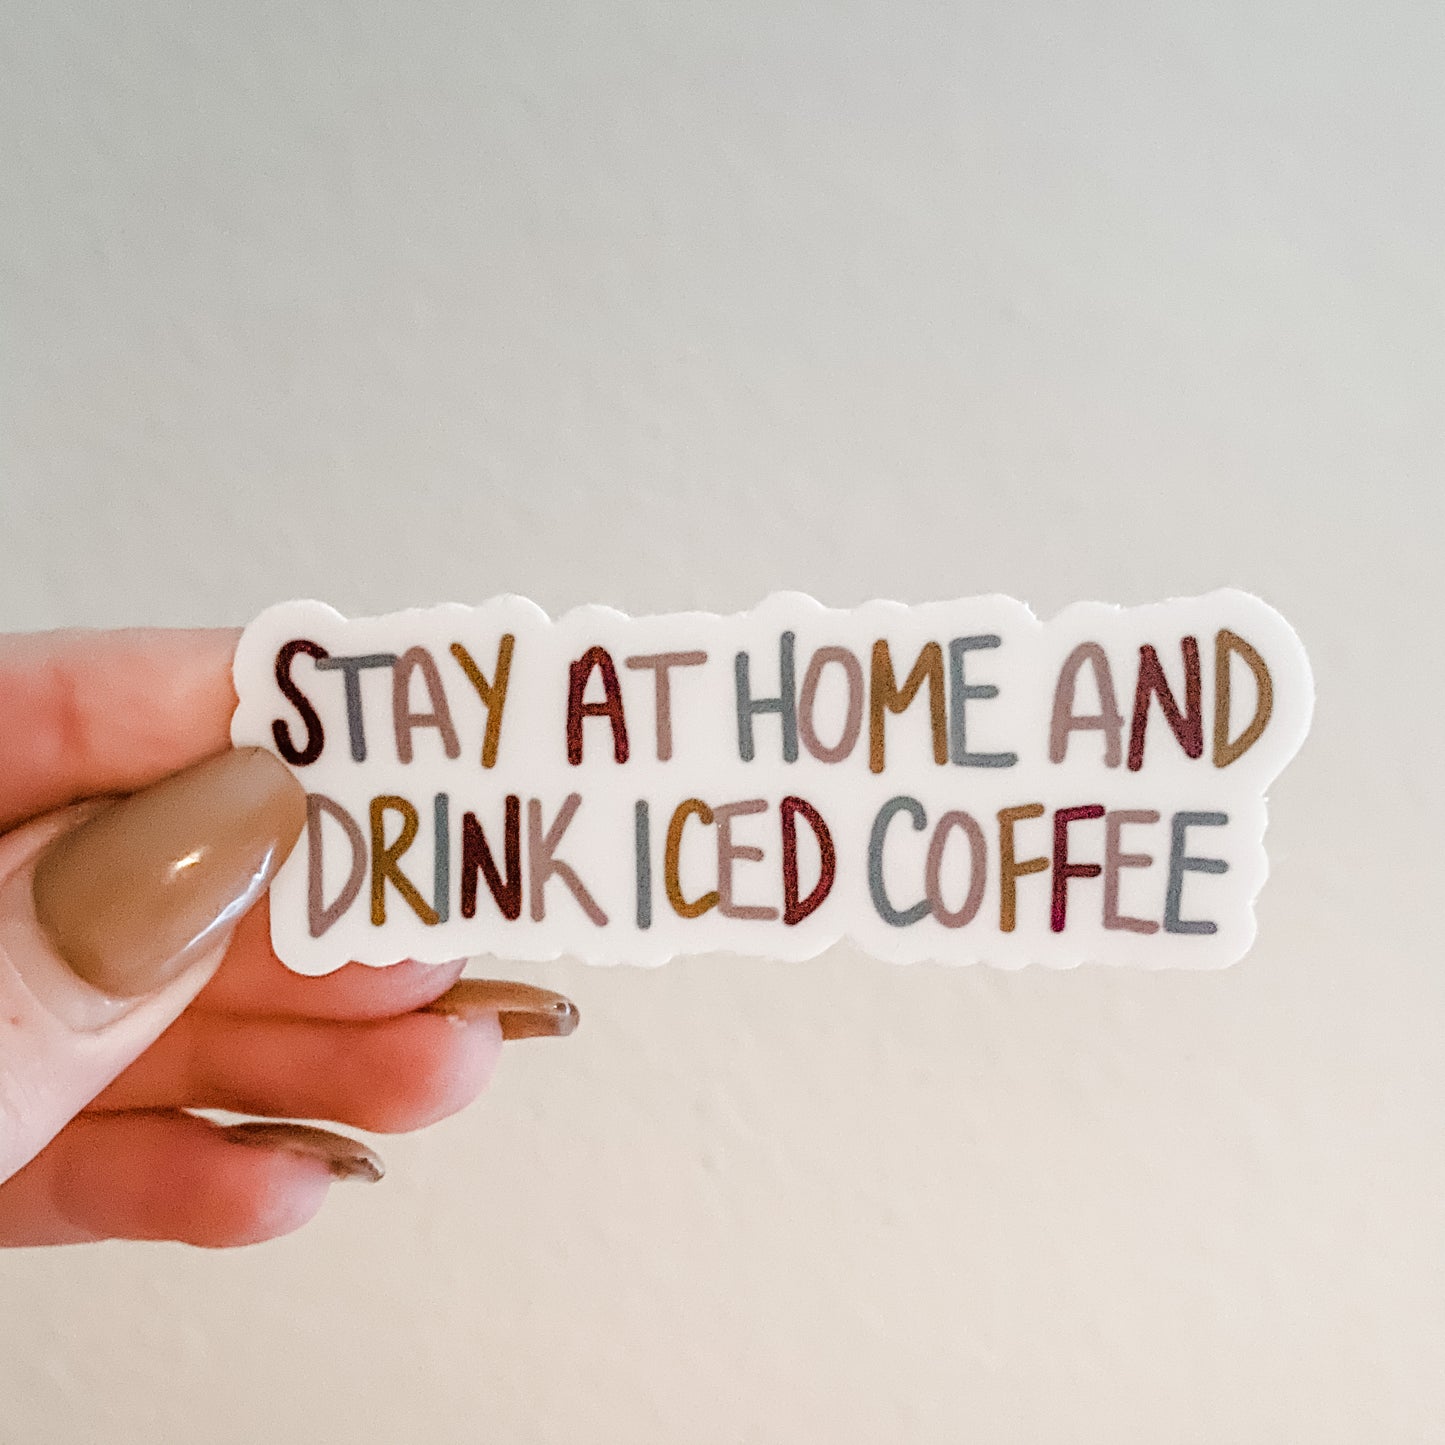 Home and Drink Iced Coffee Sticker